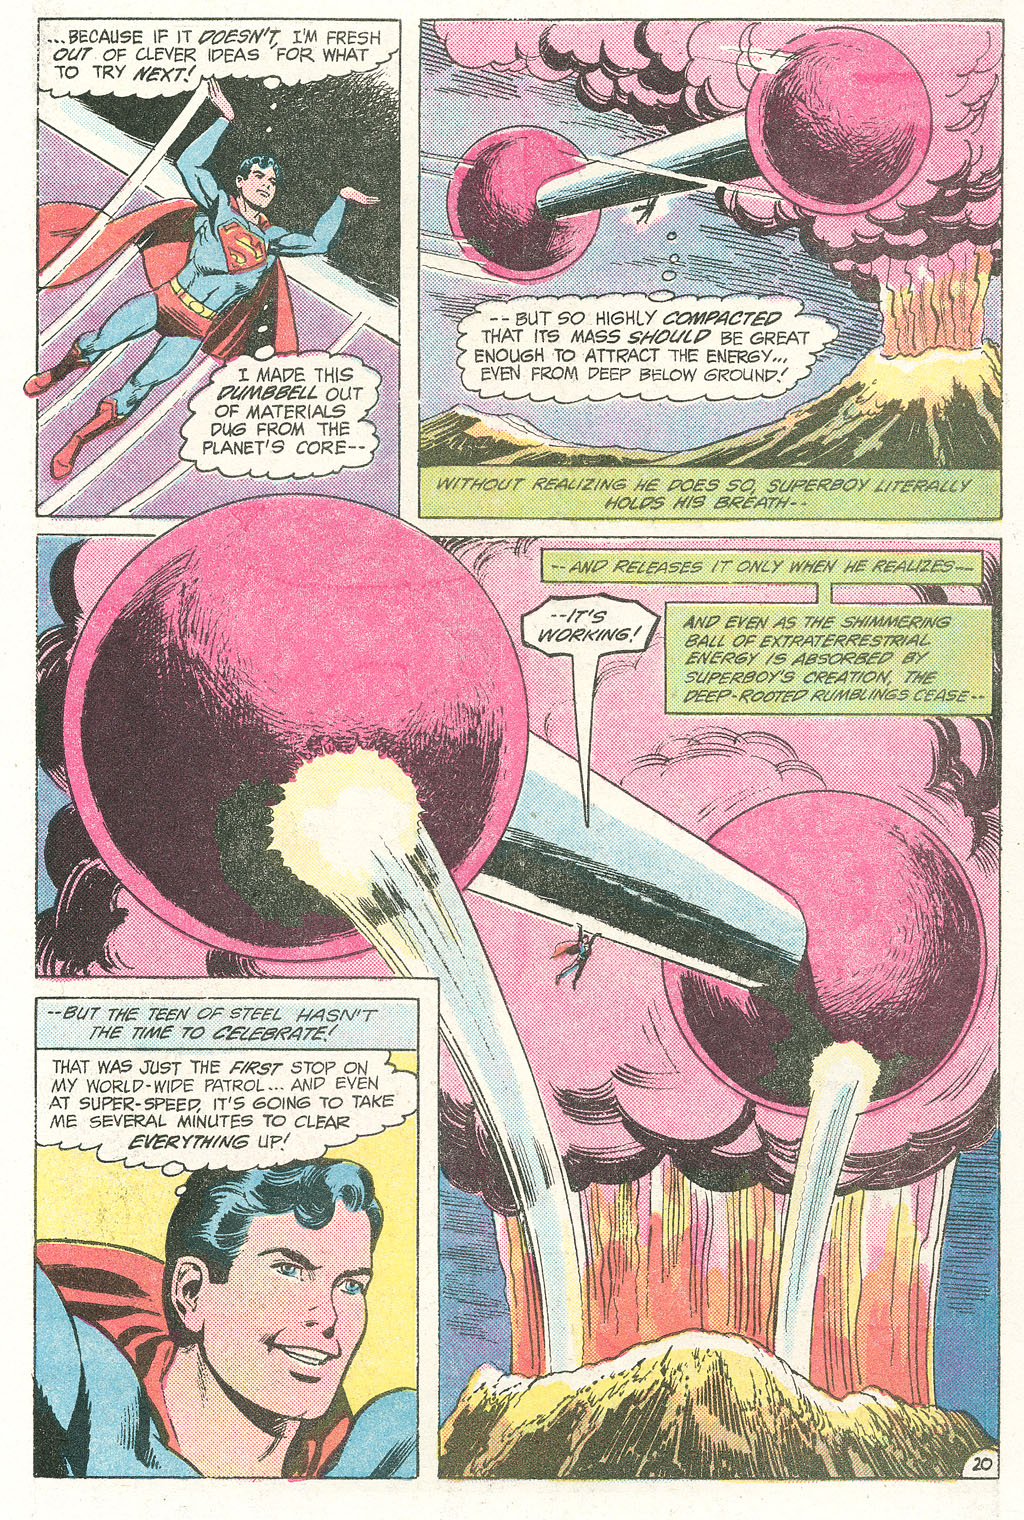 The New Adventures of Superboy 54 Page 26